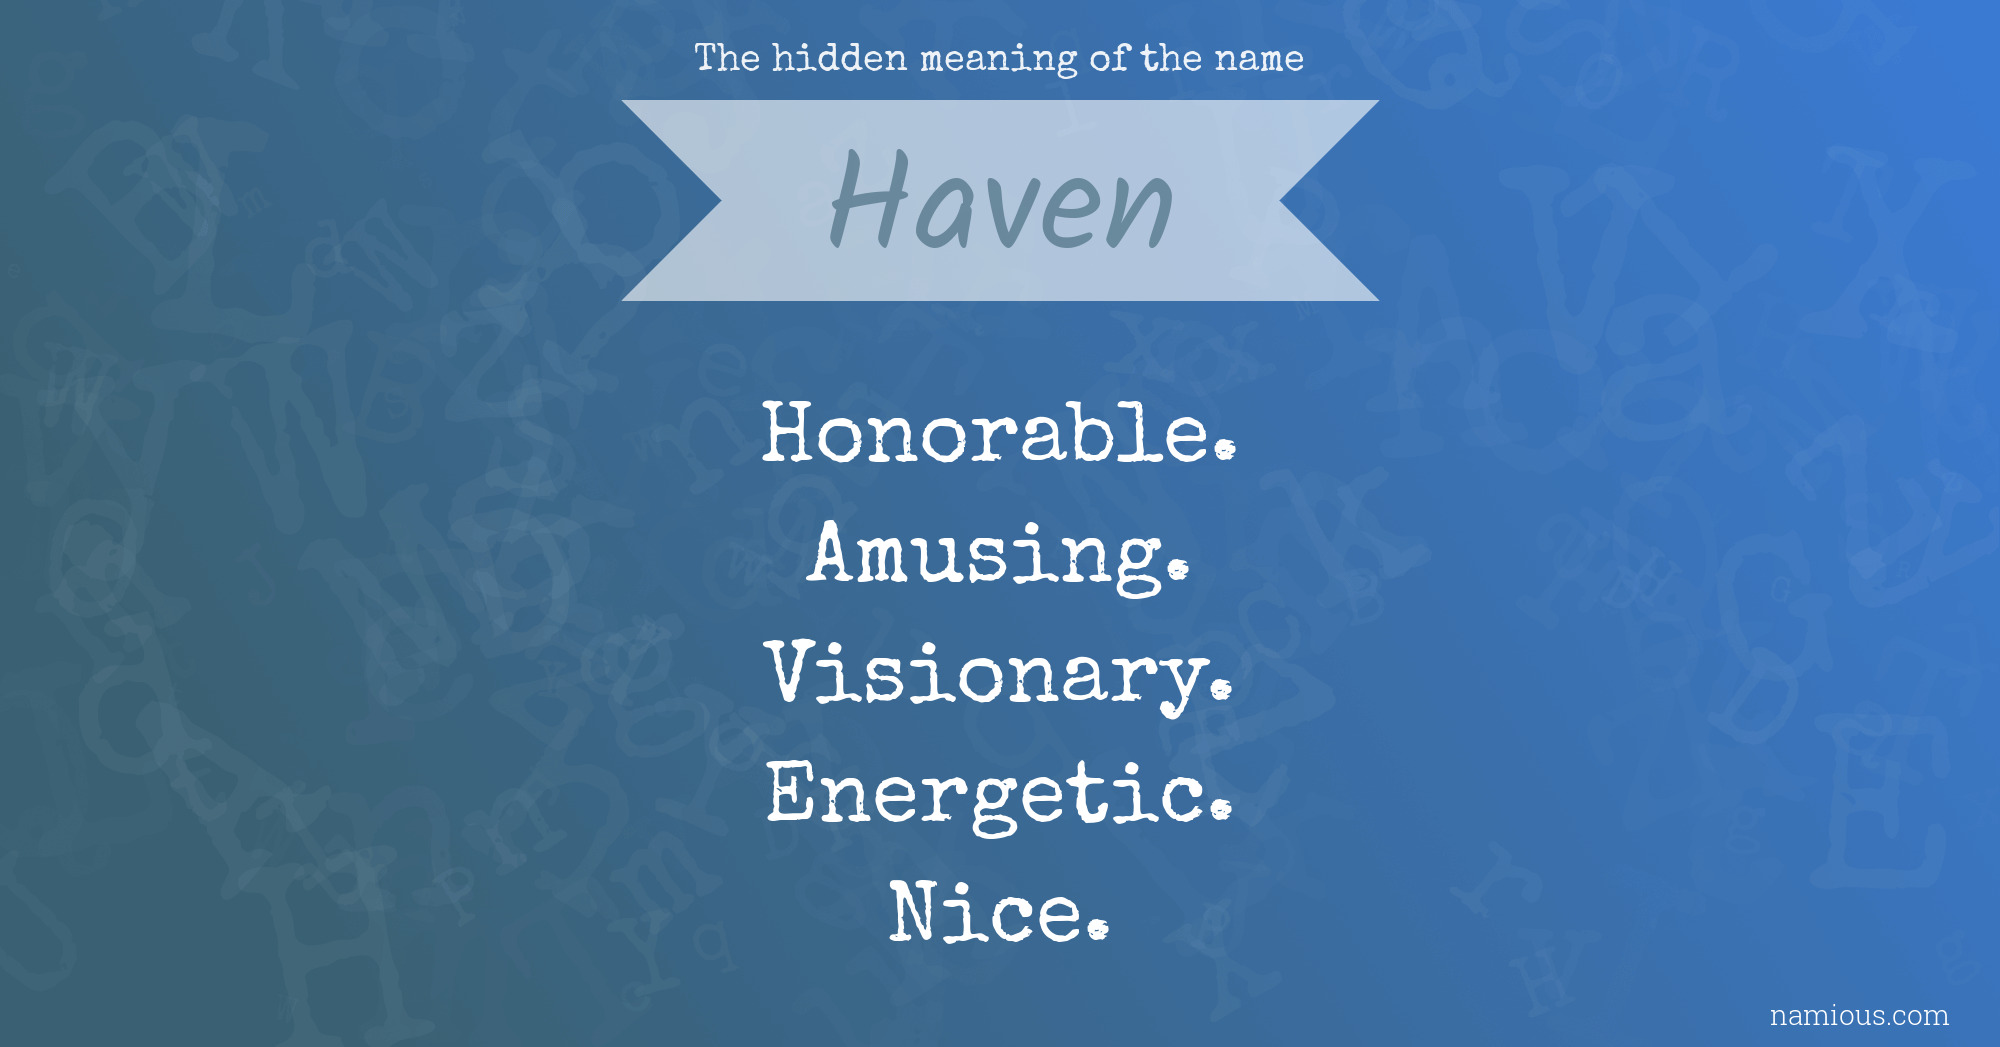 The hidden meaning of the name Haven